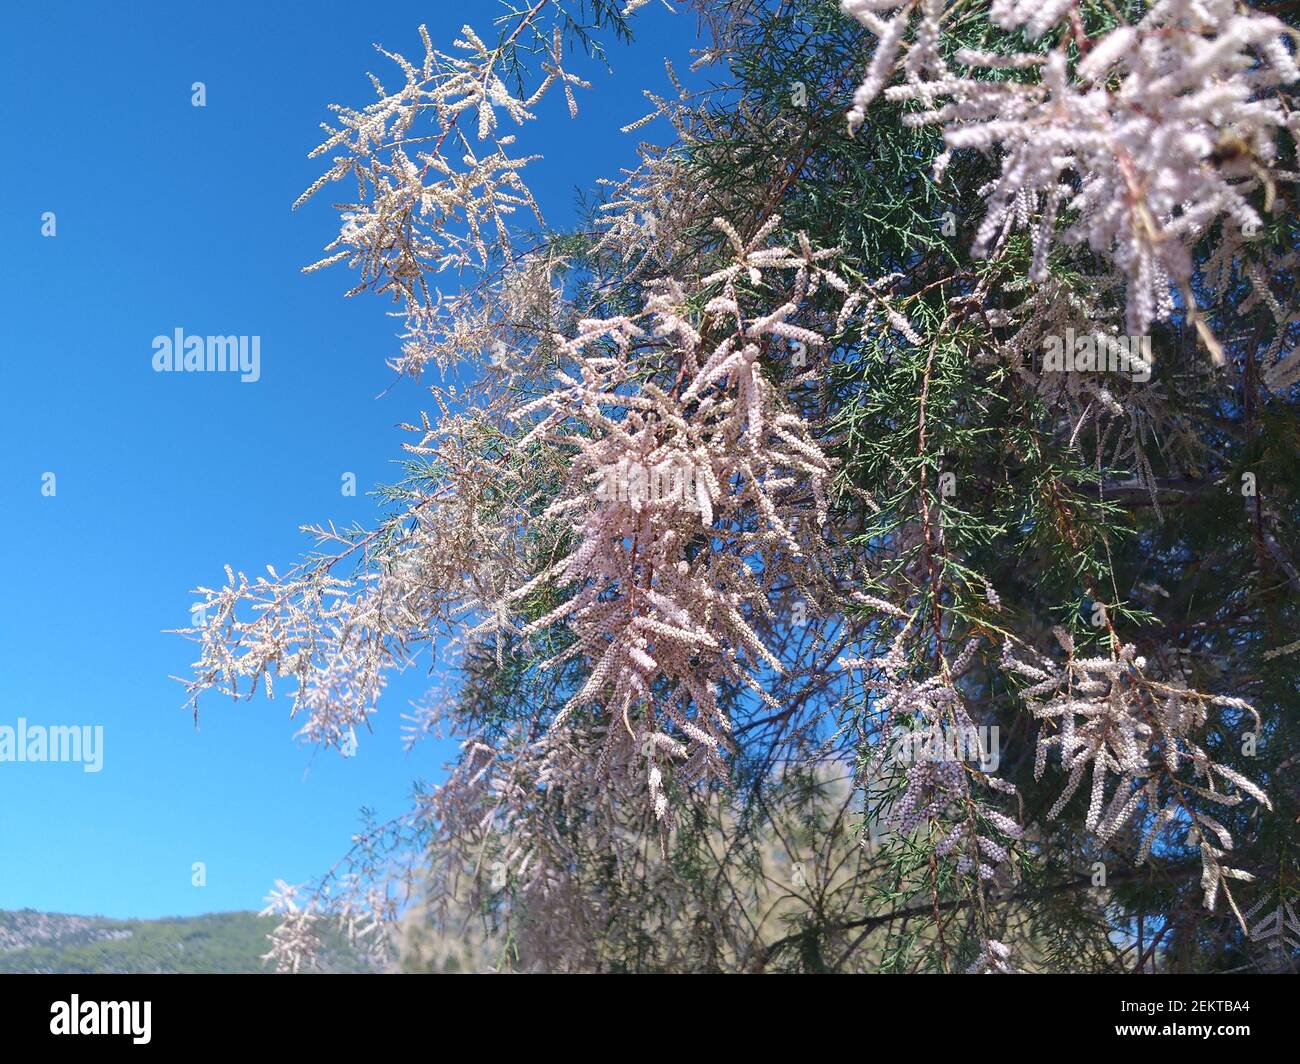 Tamarisk tree with pink flowers in full bloom Stock Photo